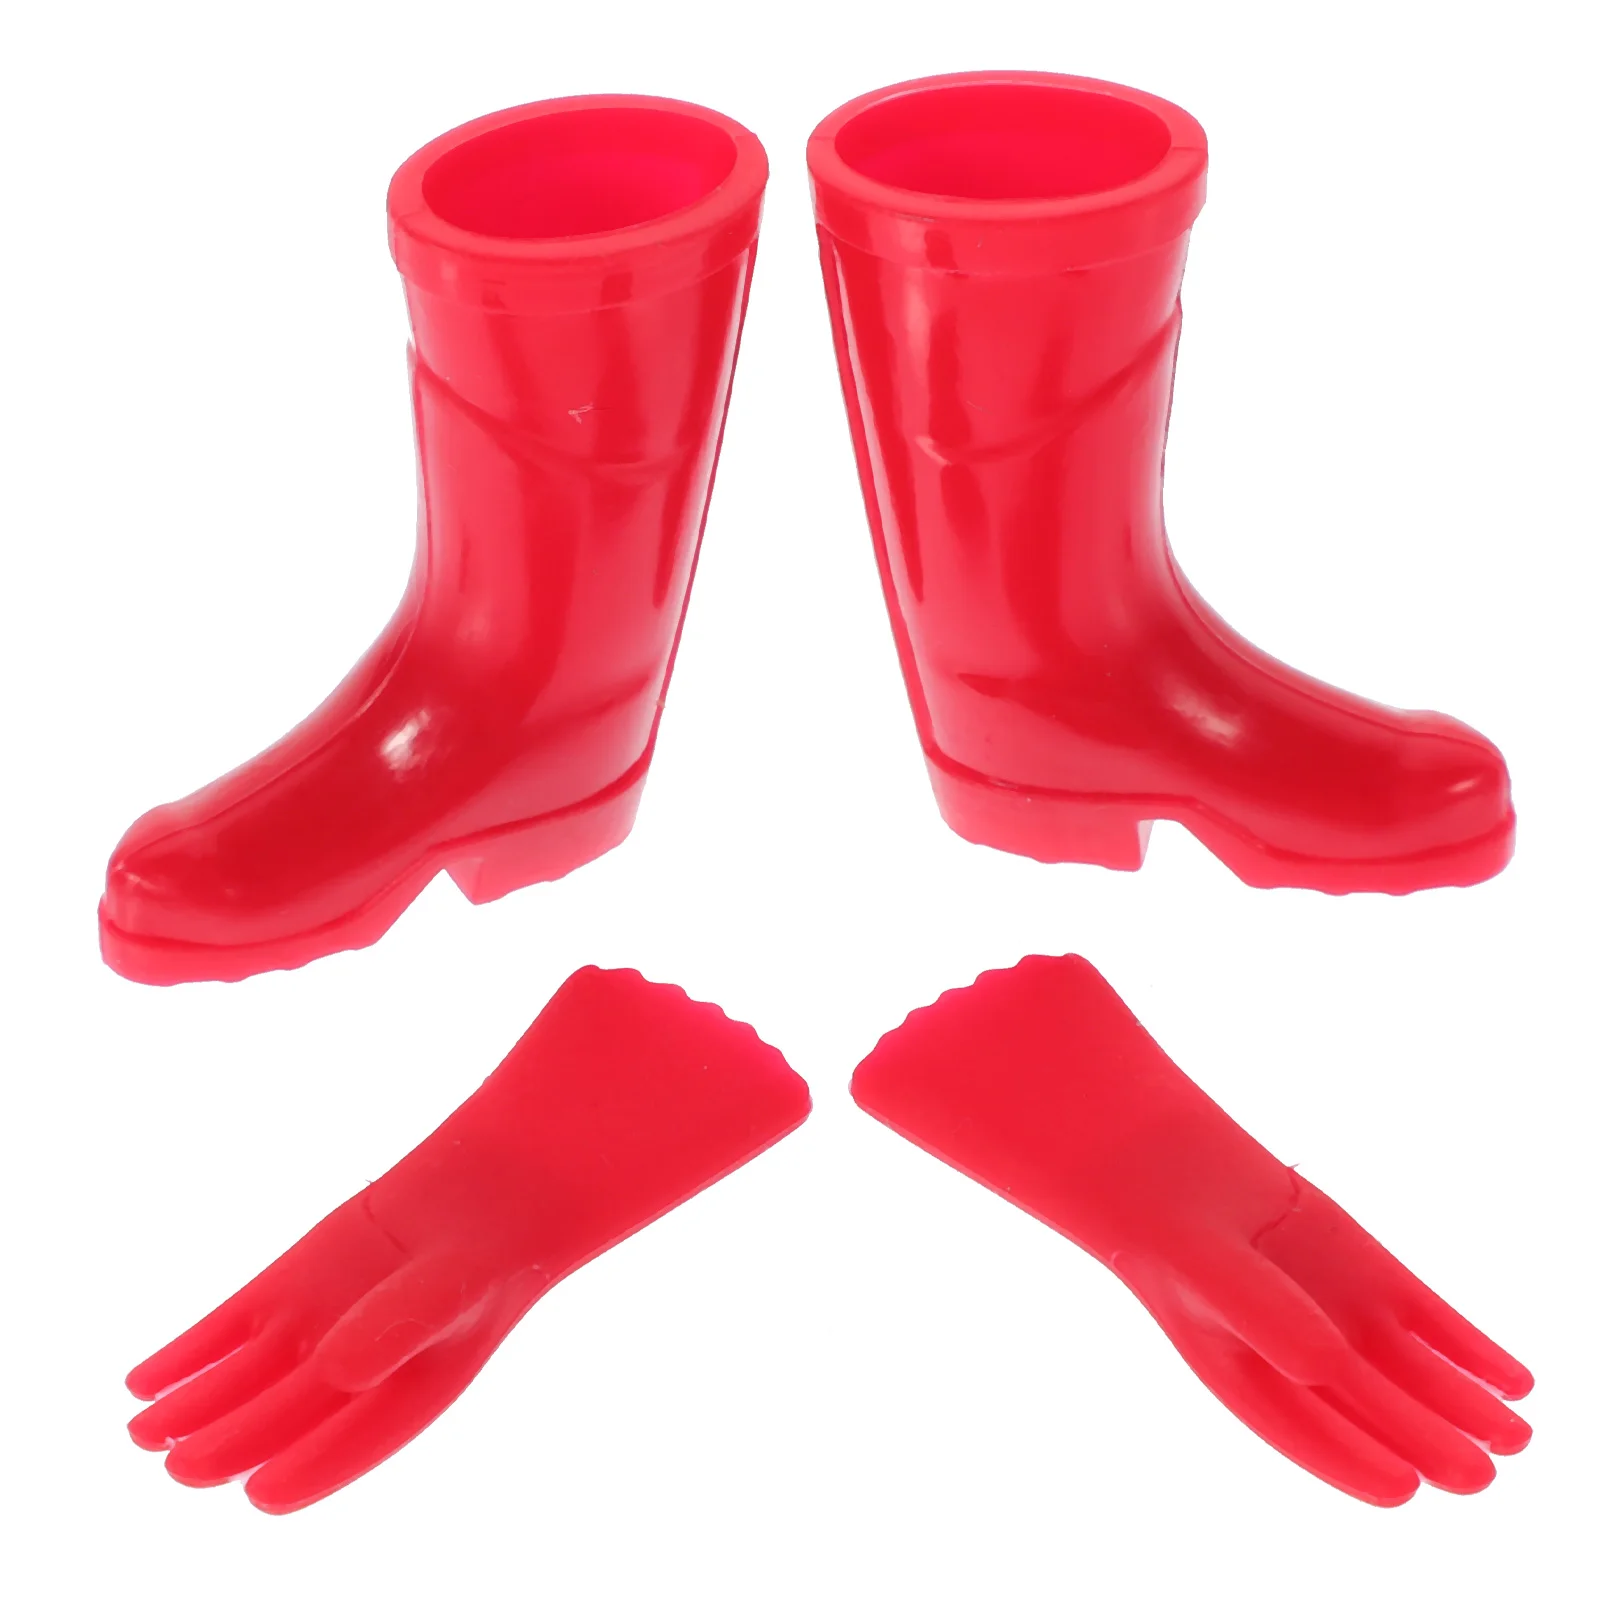 House Gloves Gloves House Supplies Simulated Dollhouse Miniature Accessories Shoes Rainshoes Layout Prop 1 set of guitar accessories music instrument models guitar accessories miniature musical prop guitar accessories supplies